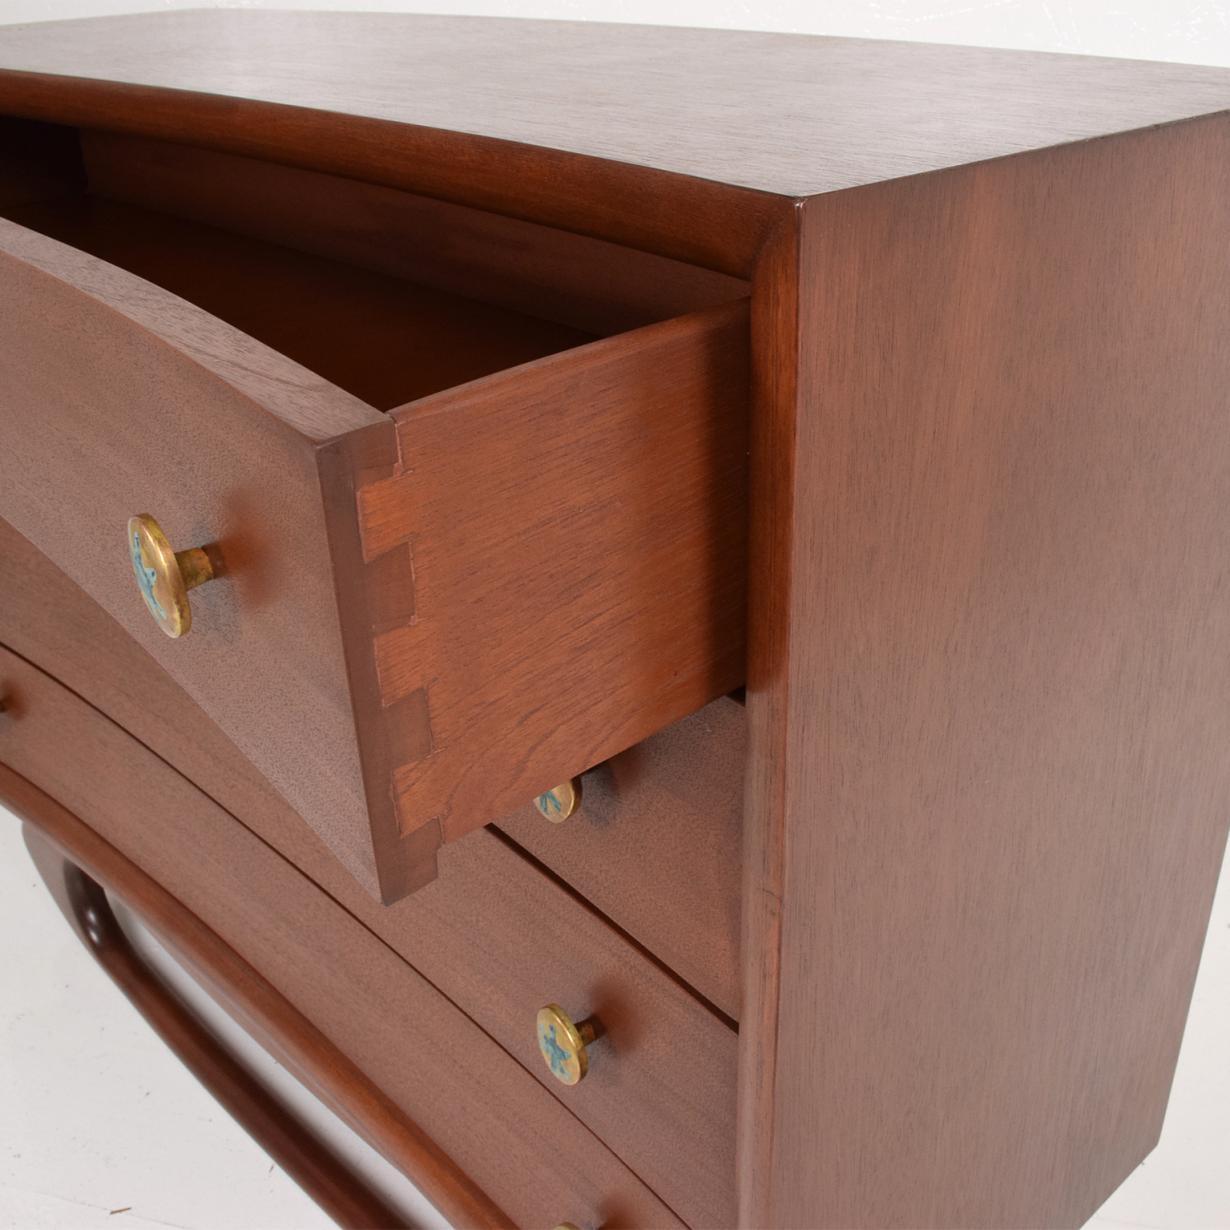 For your consideration, a midcentury Mexican modernist chest of drawers dresser Frank Kyle Pepe Mendoza.


Constructed with mahogany wood. Cabinet has a slight curve inwards in the front. All drawers are constructed with solid mahogany wood and